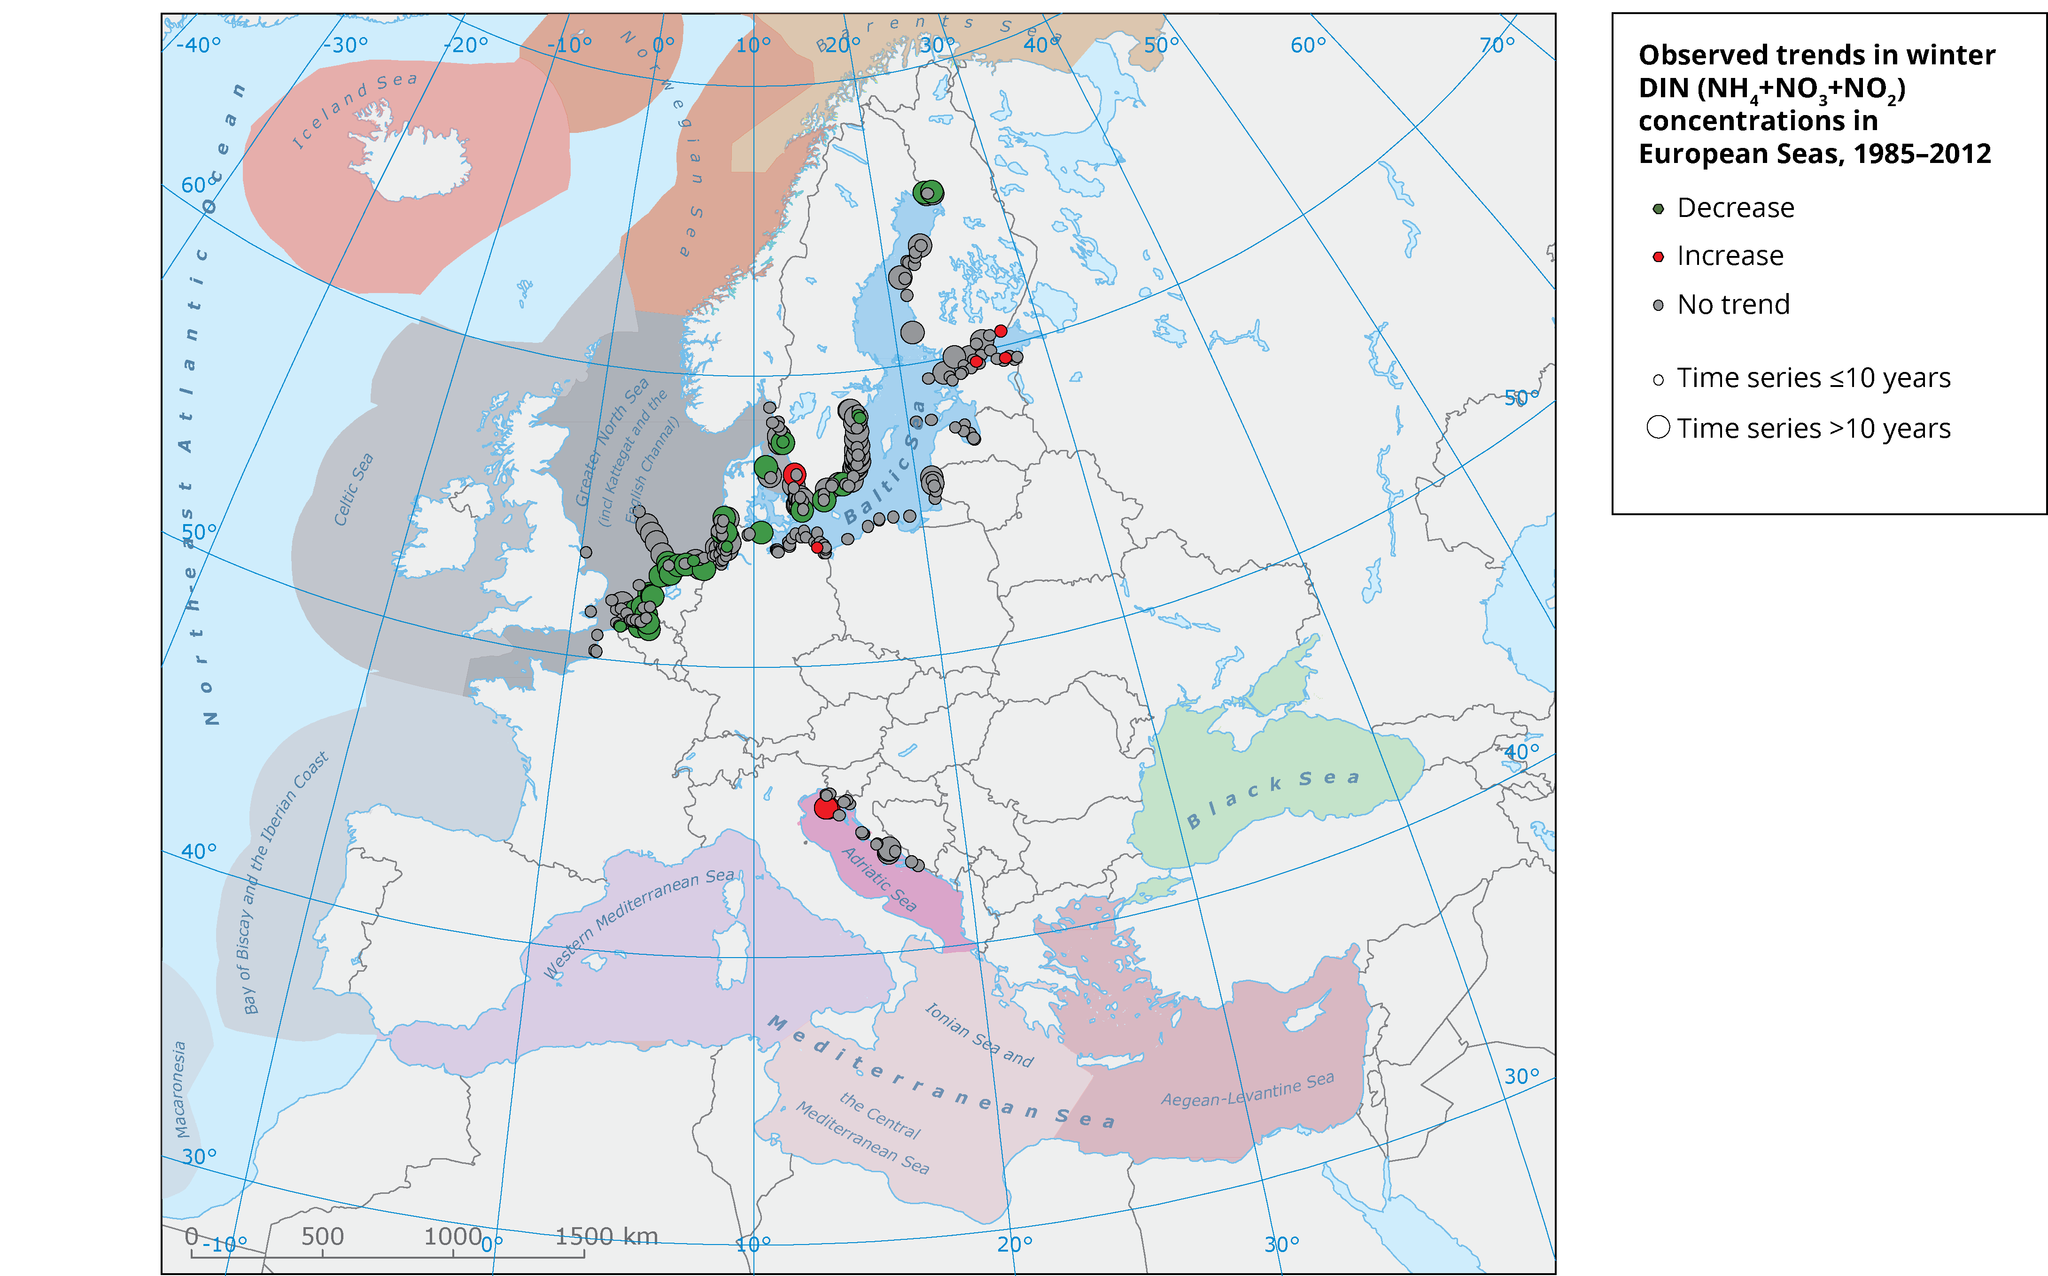 Trends per station in dissolved inorganic nitrogen concentrations in European seas